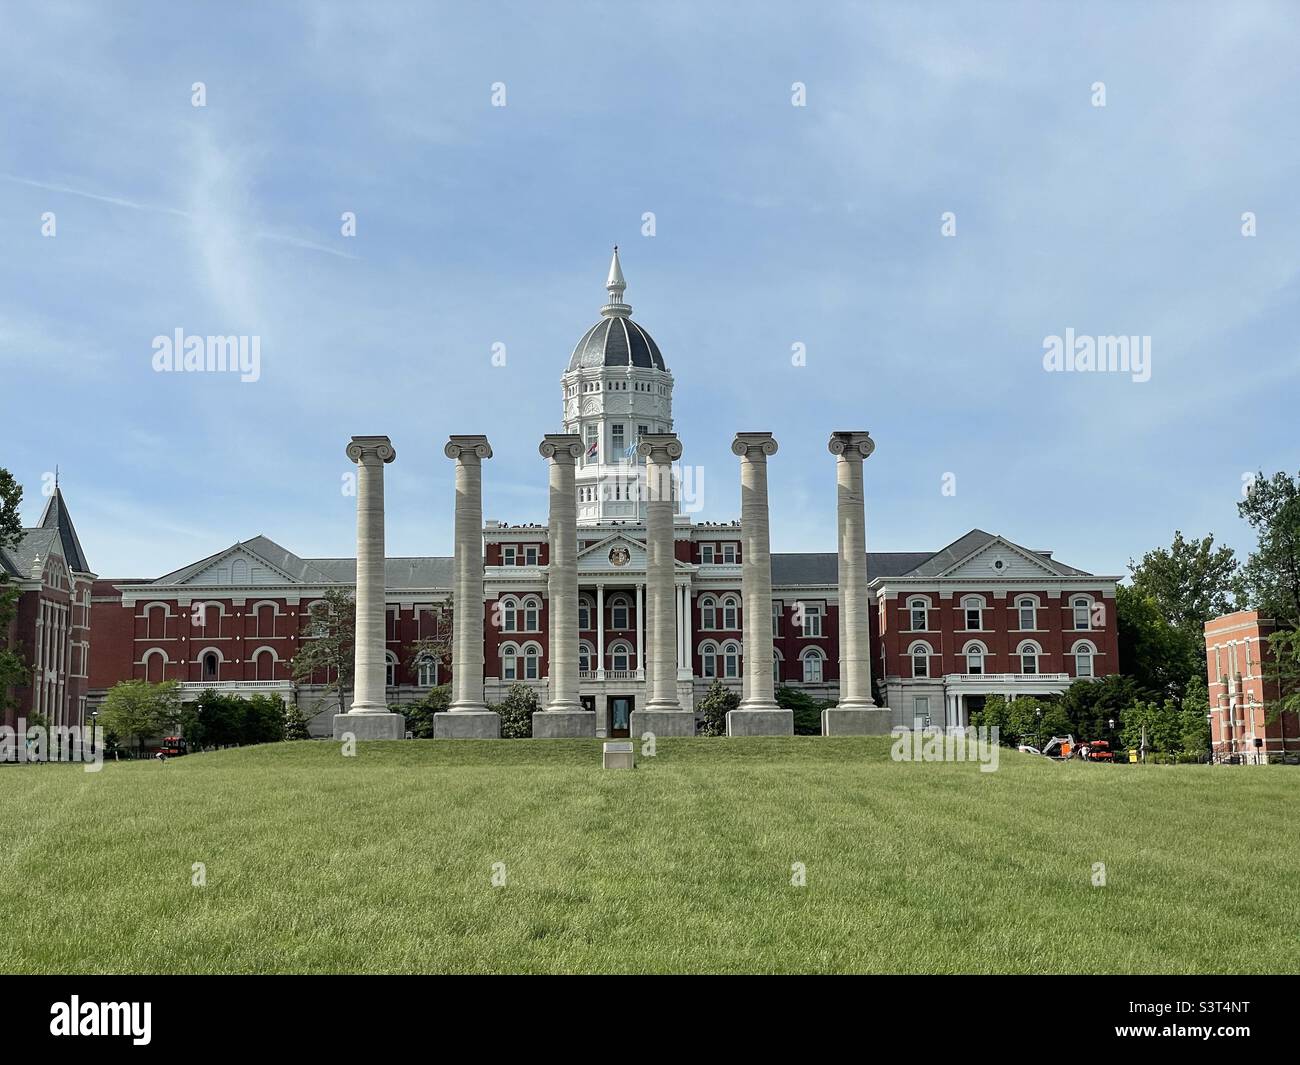 Th columns at the University of Missouri in Columbia. Stock Photo